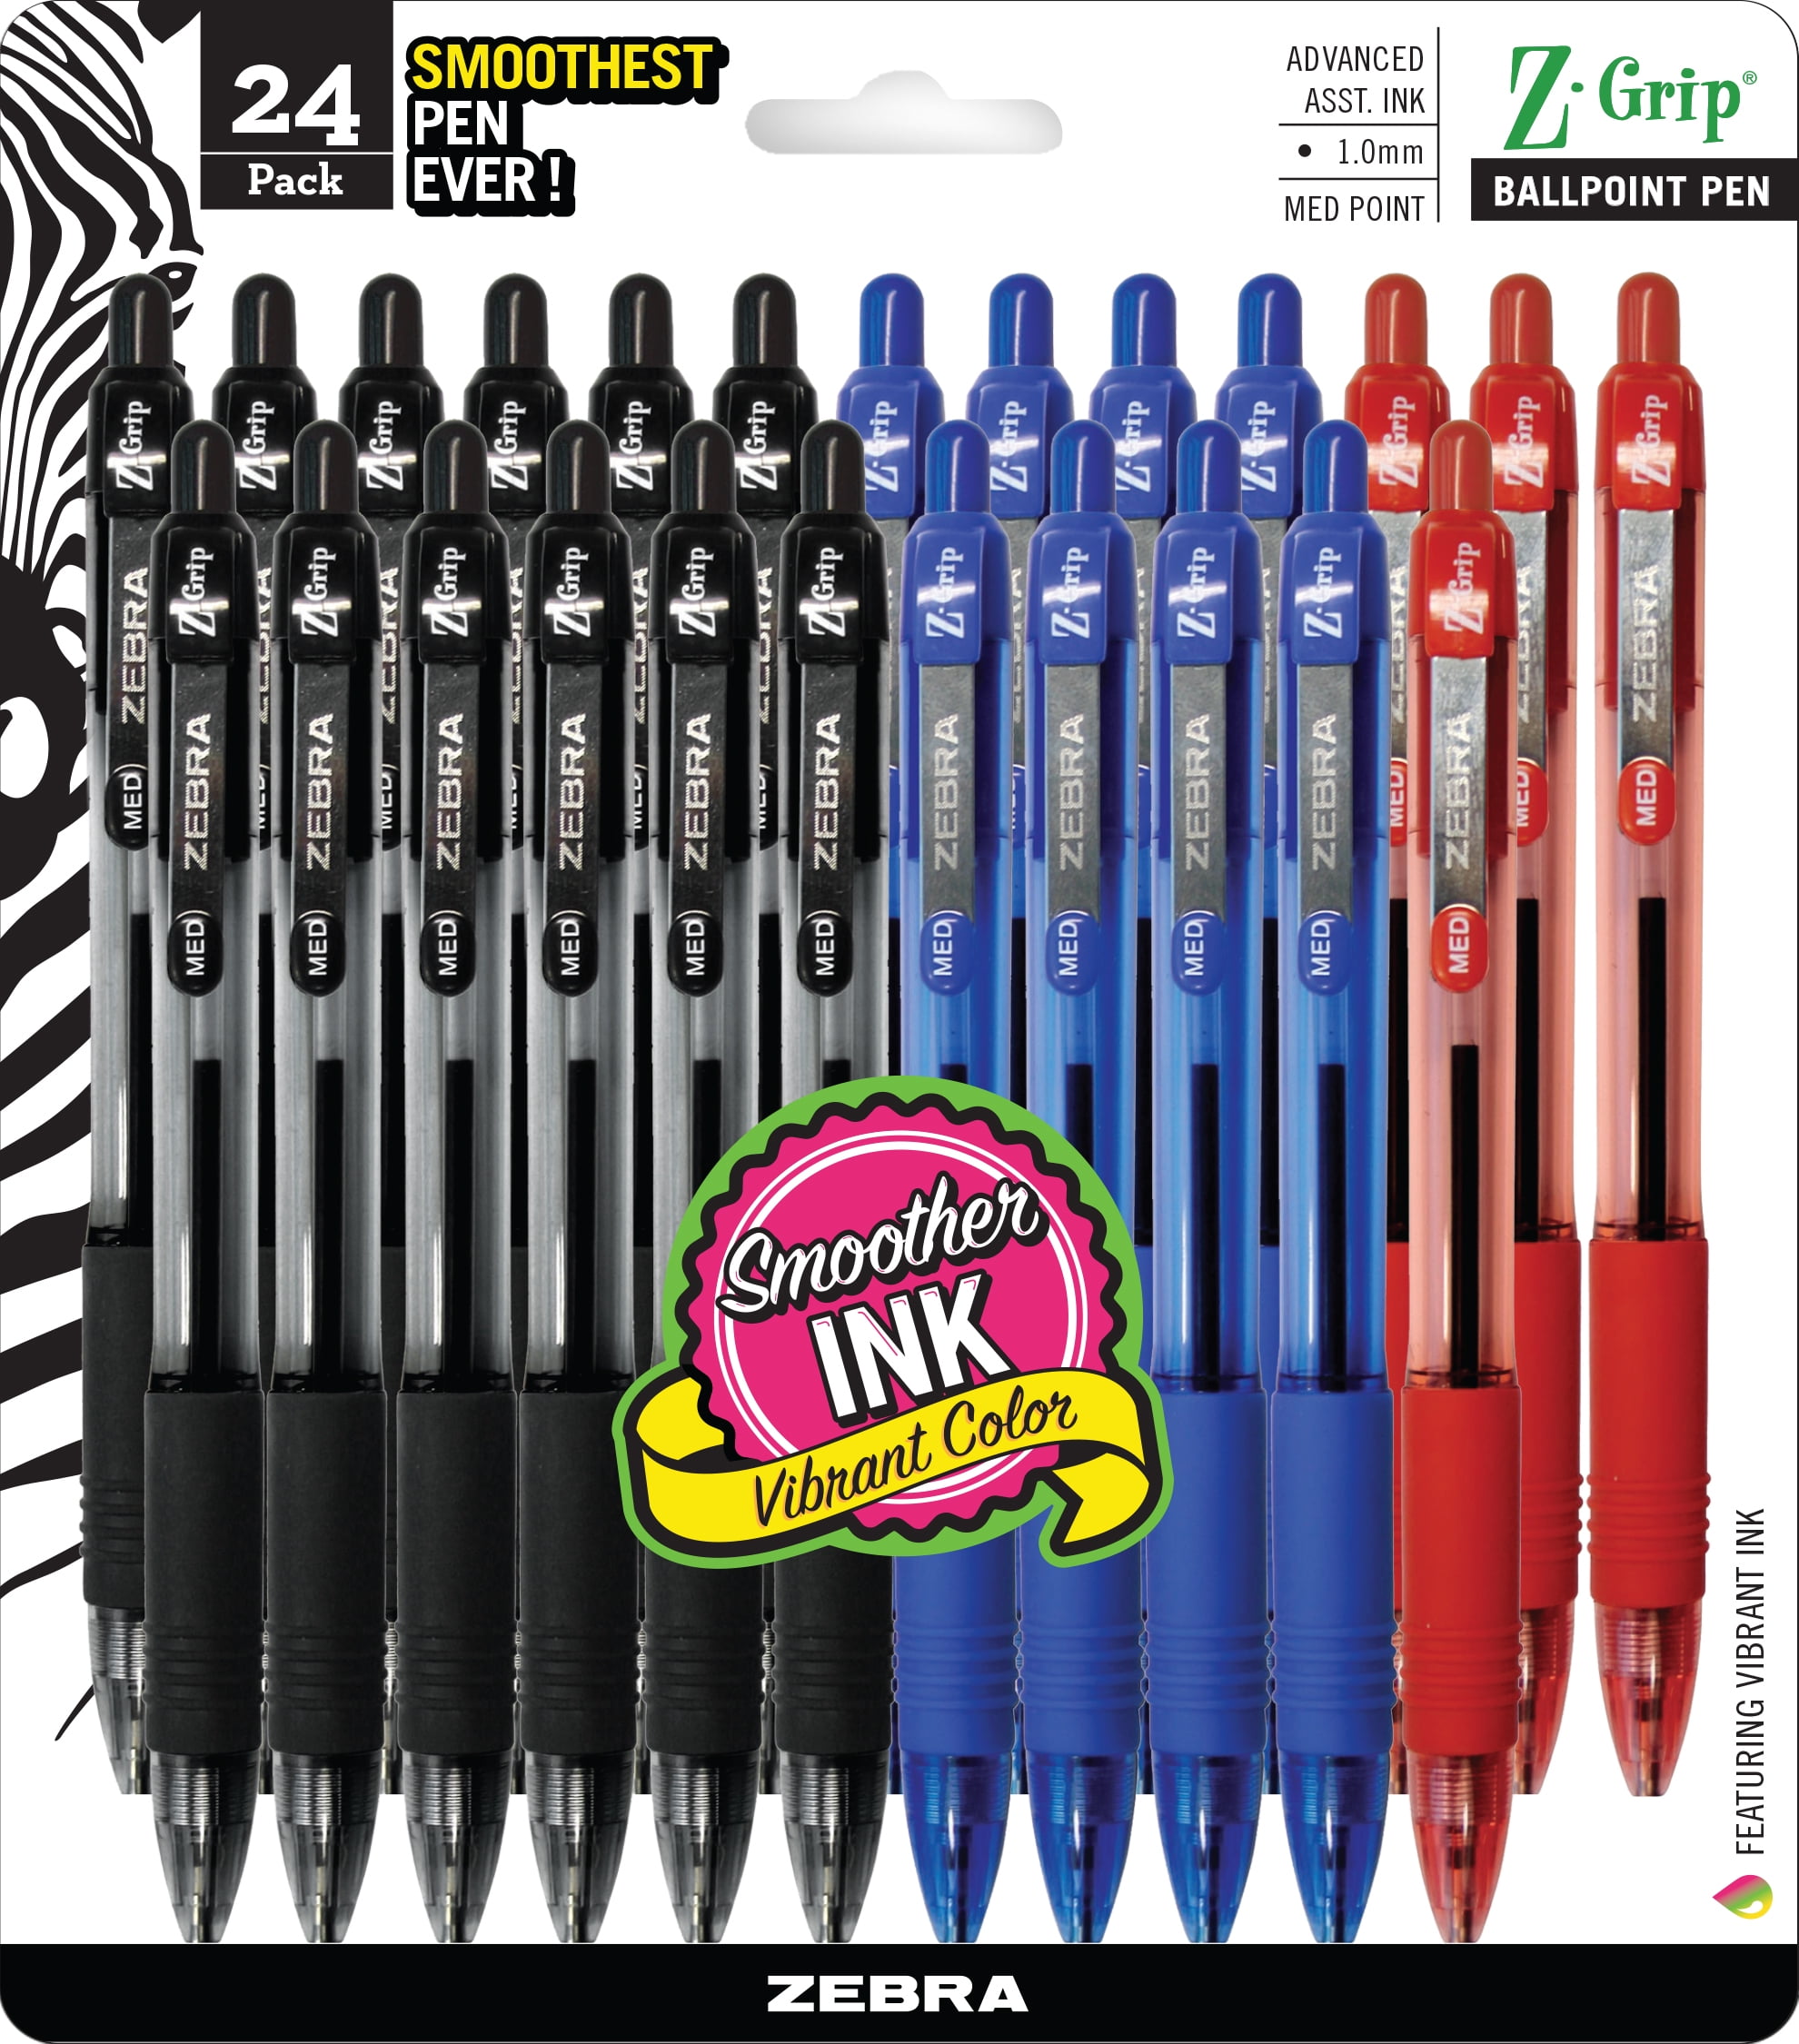 PenAgain Ergosof Ballpoint Pen Set of 4 Colors Black Silver Red and Blue for sale online 